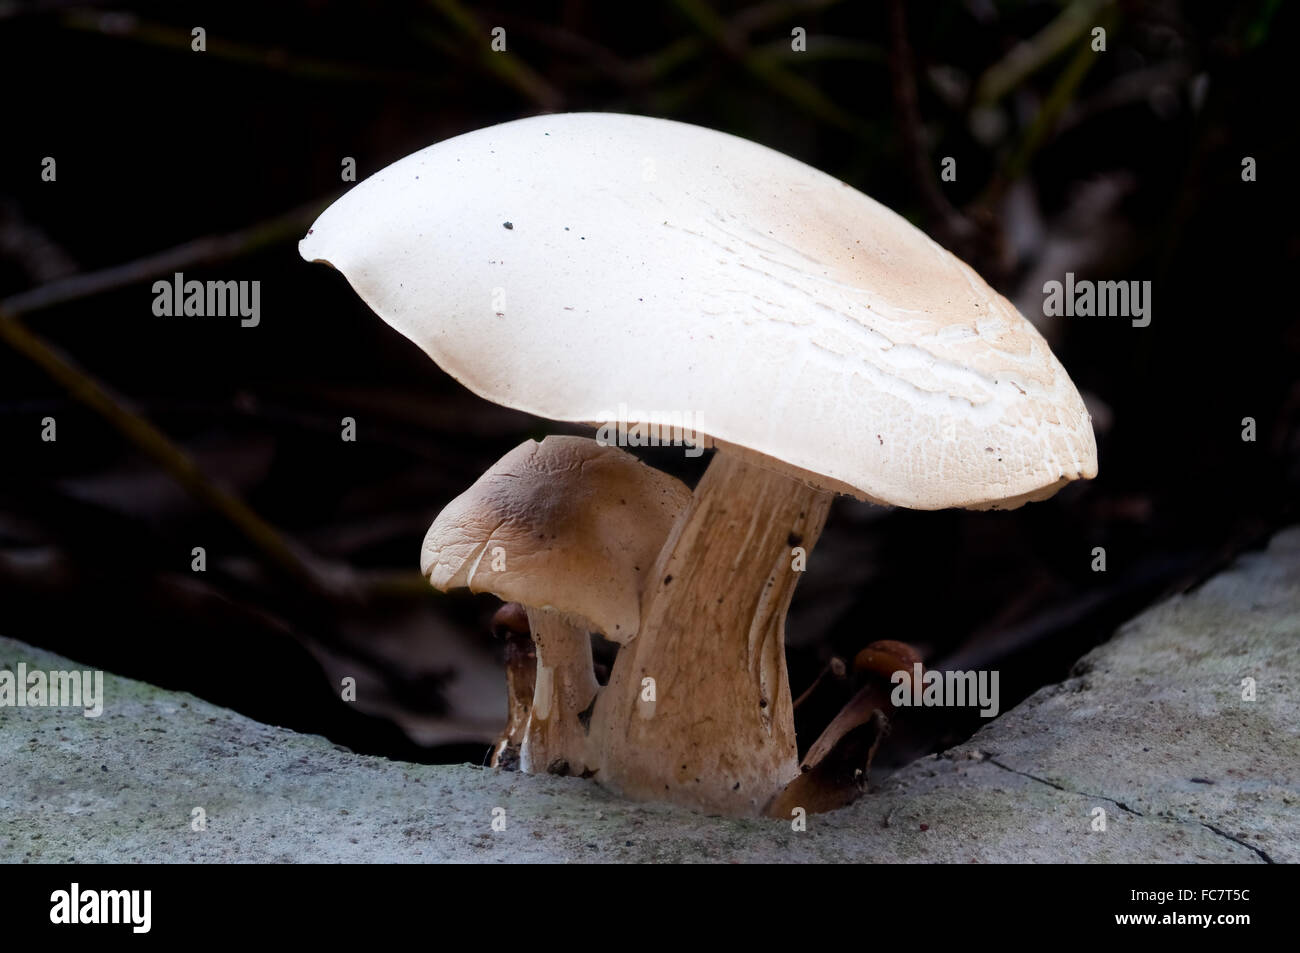 White mushroom grow under shade of bushes in parking lot. Stock Photo